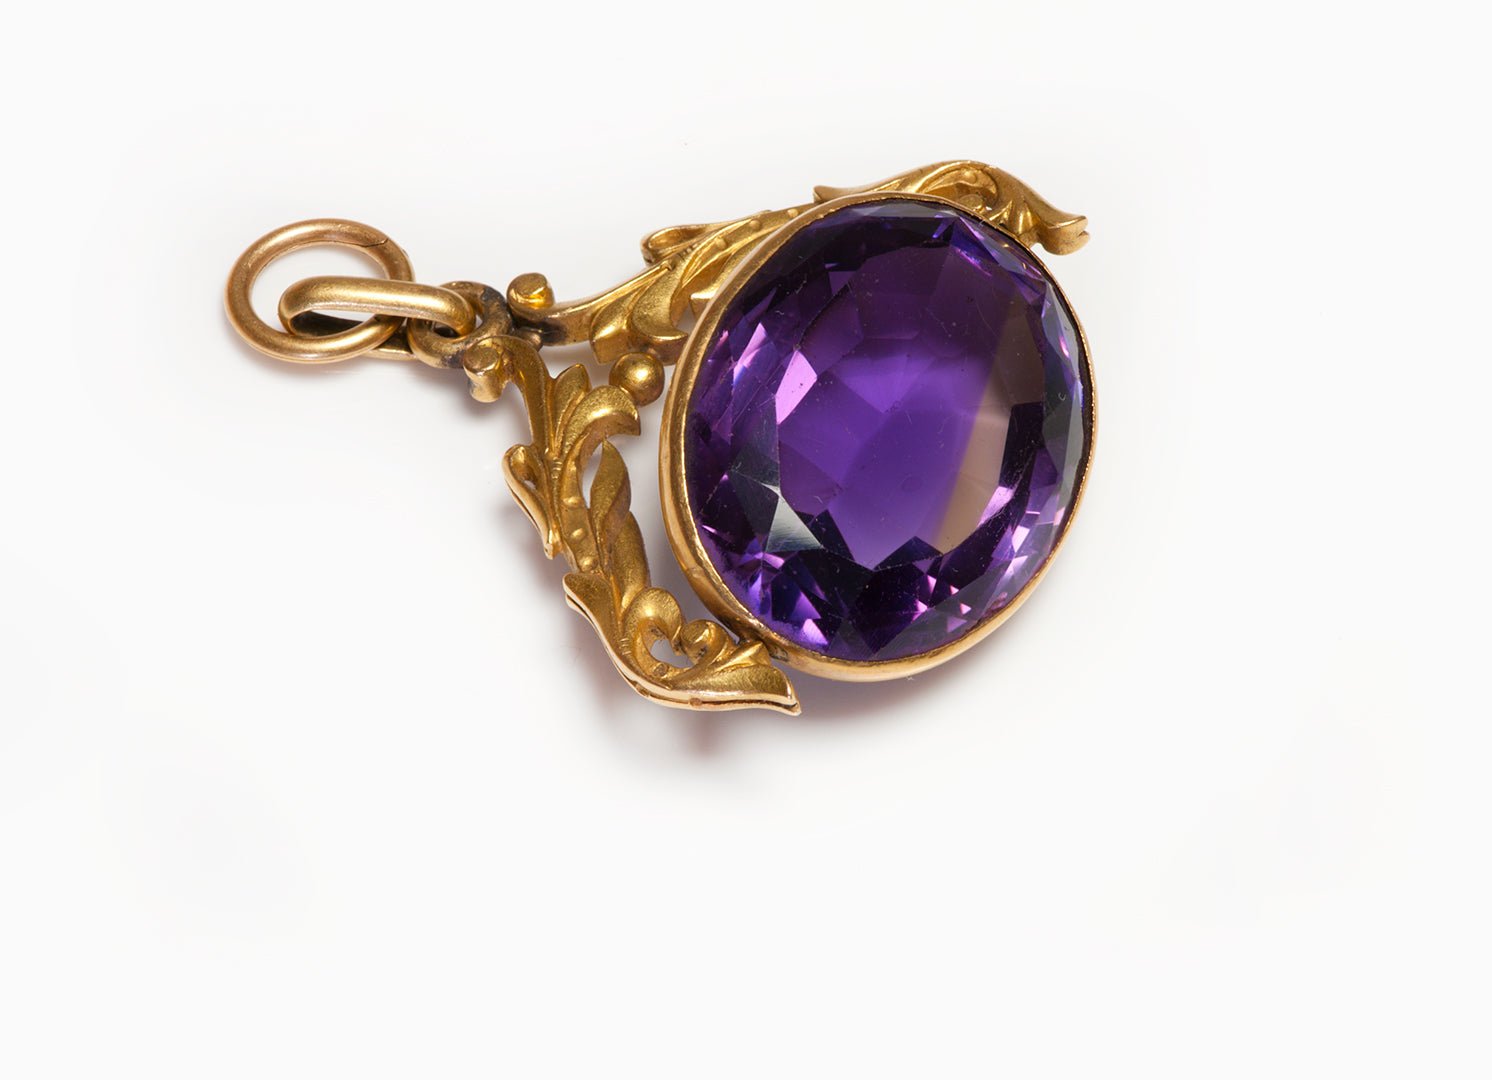 Antique Art Nouveau Yellow Gold Amethyst Fob - DSF Antique Jewelry